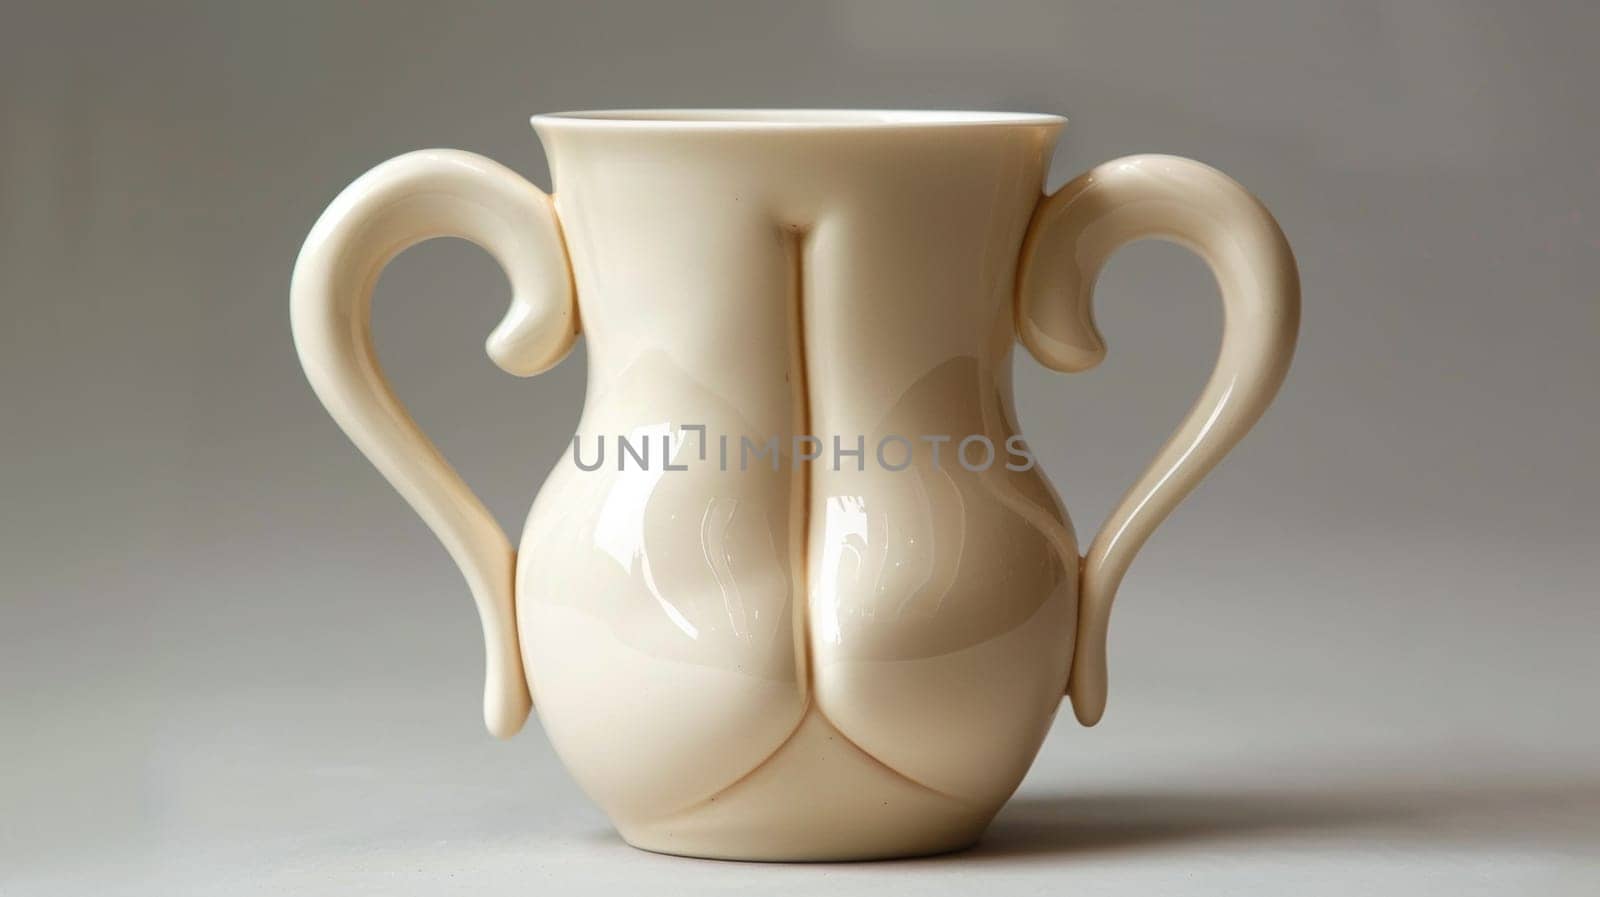 A white vase with a curved bottom and two large handles